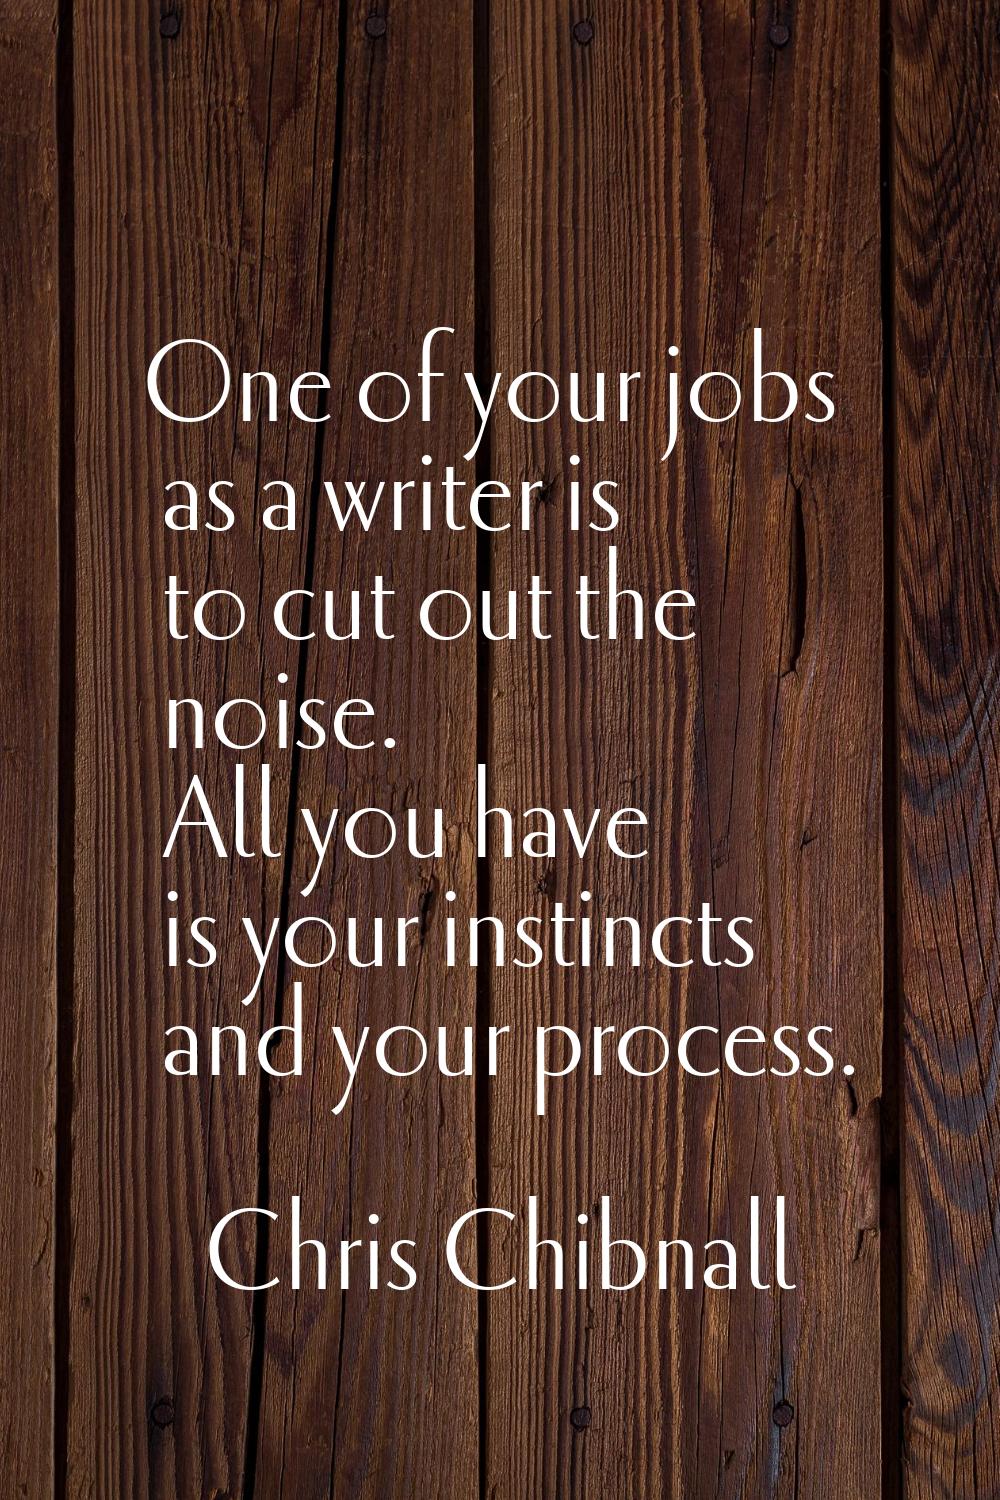 One of your jobs as a writer is to cut out the noise. All you have is your instincts and your proce